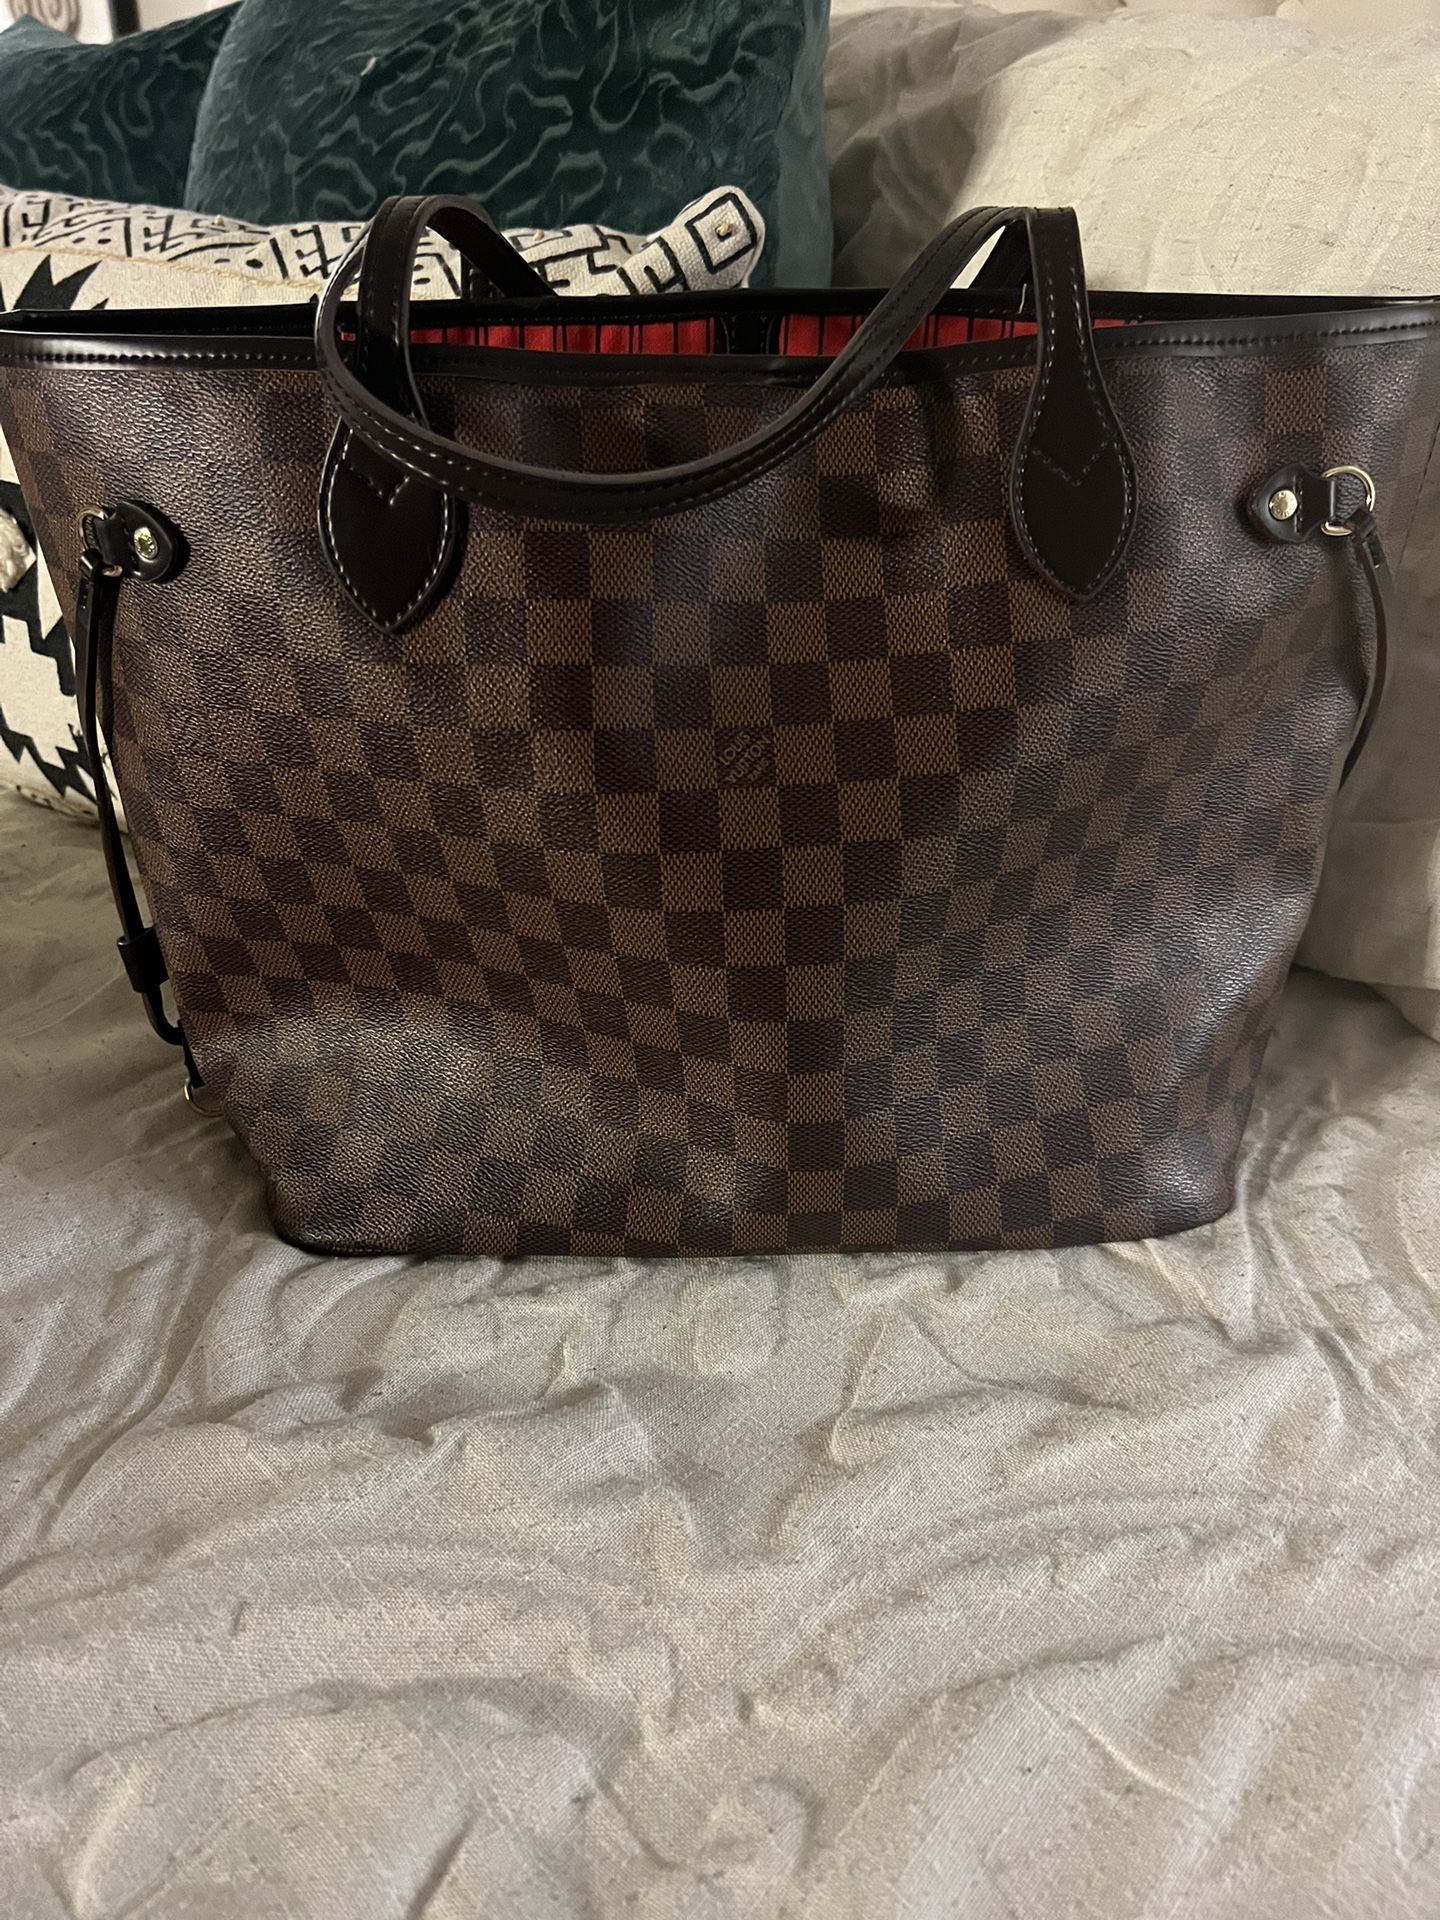 Neverfull MM for Sale in Tualatin, OR - OfferUp